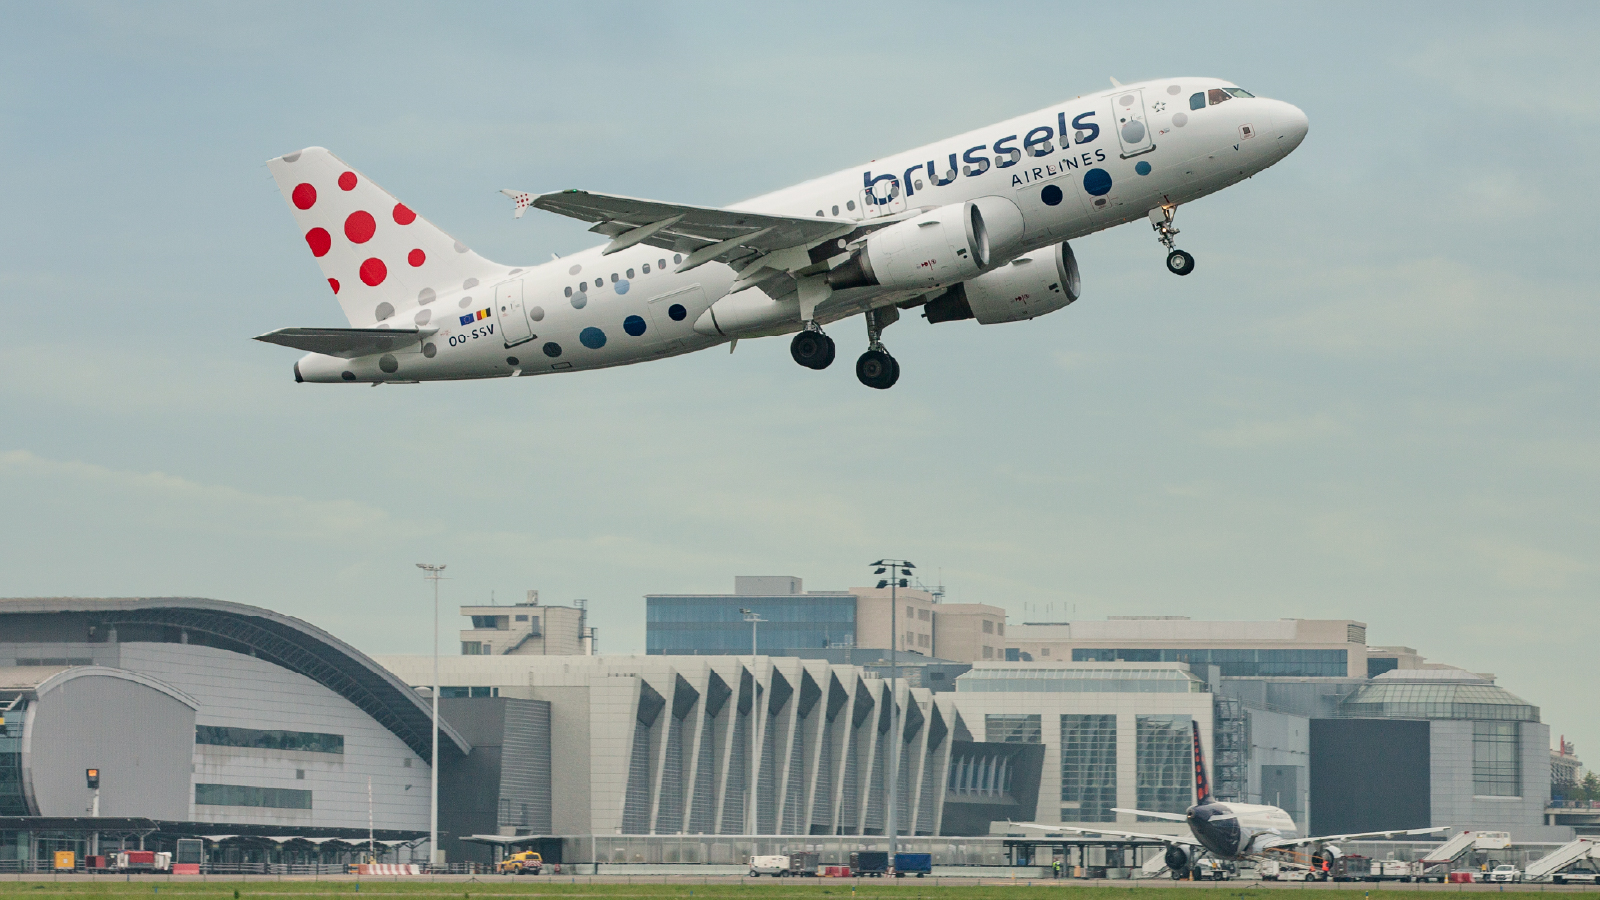 Brussels Airlines Customer Story illustrative image 1